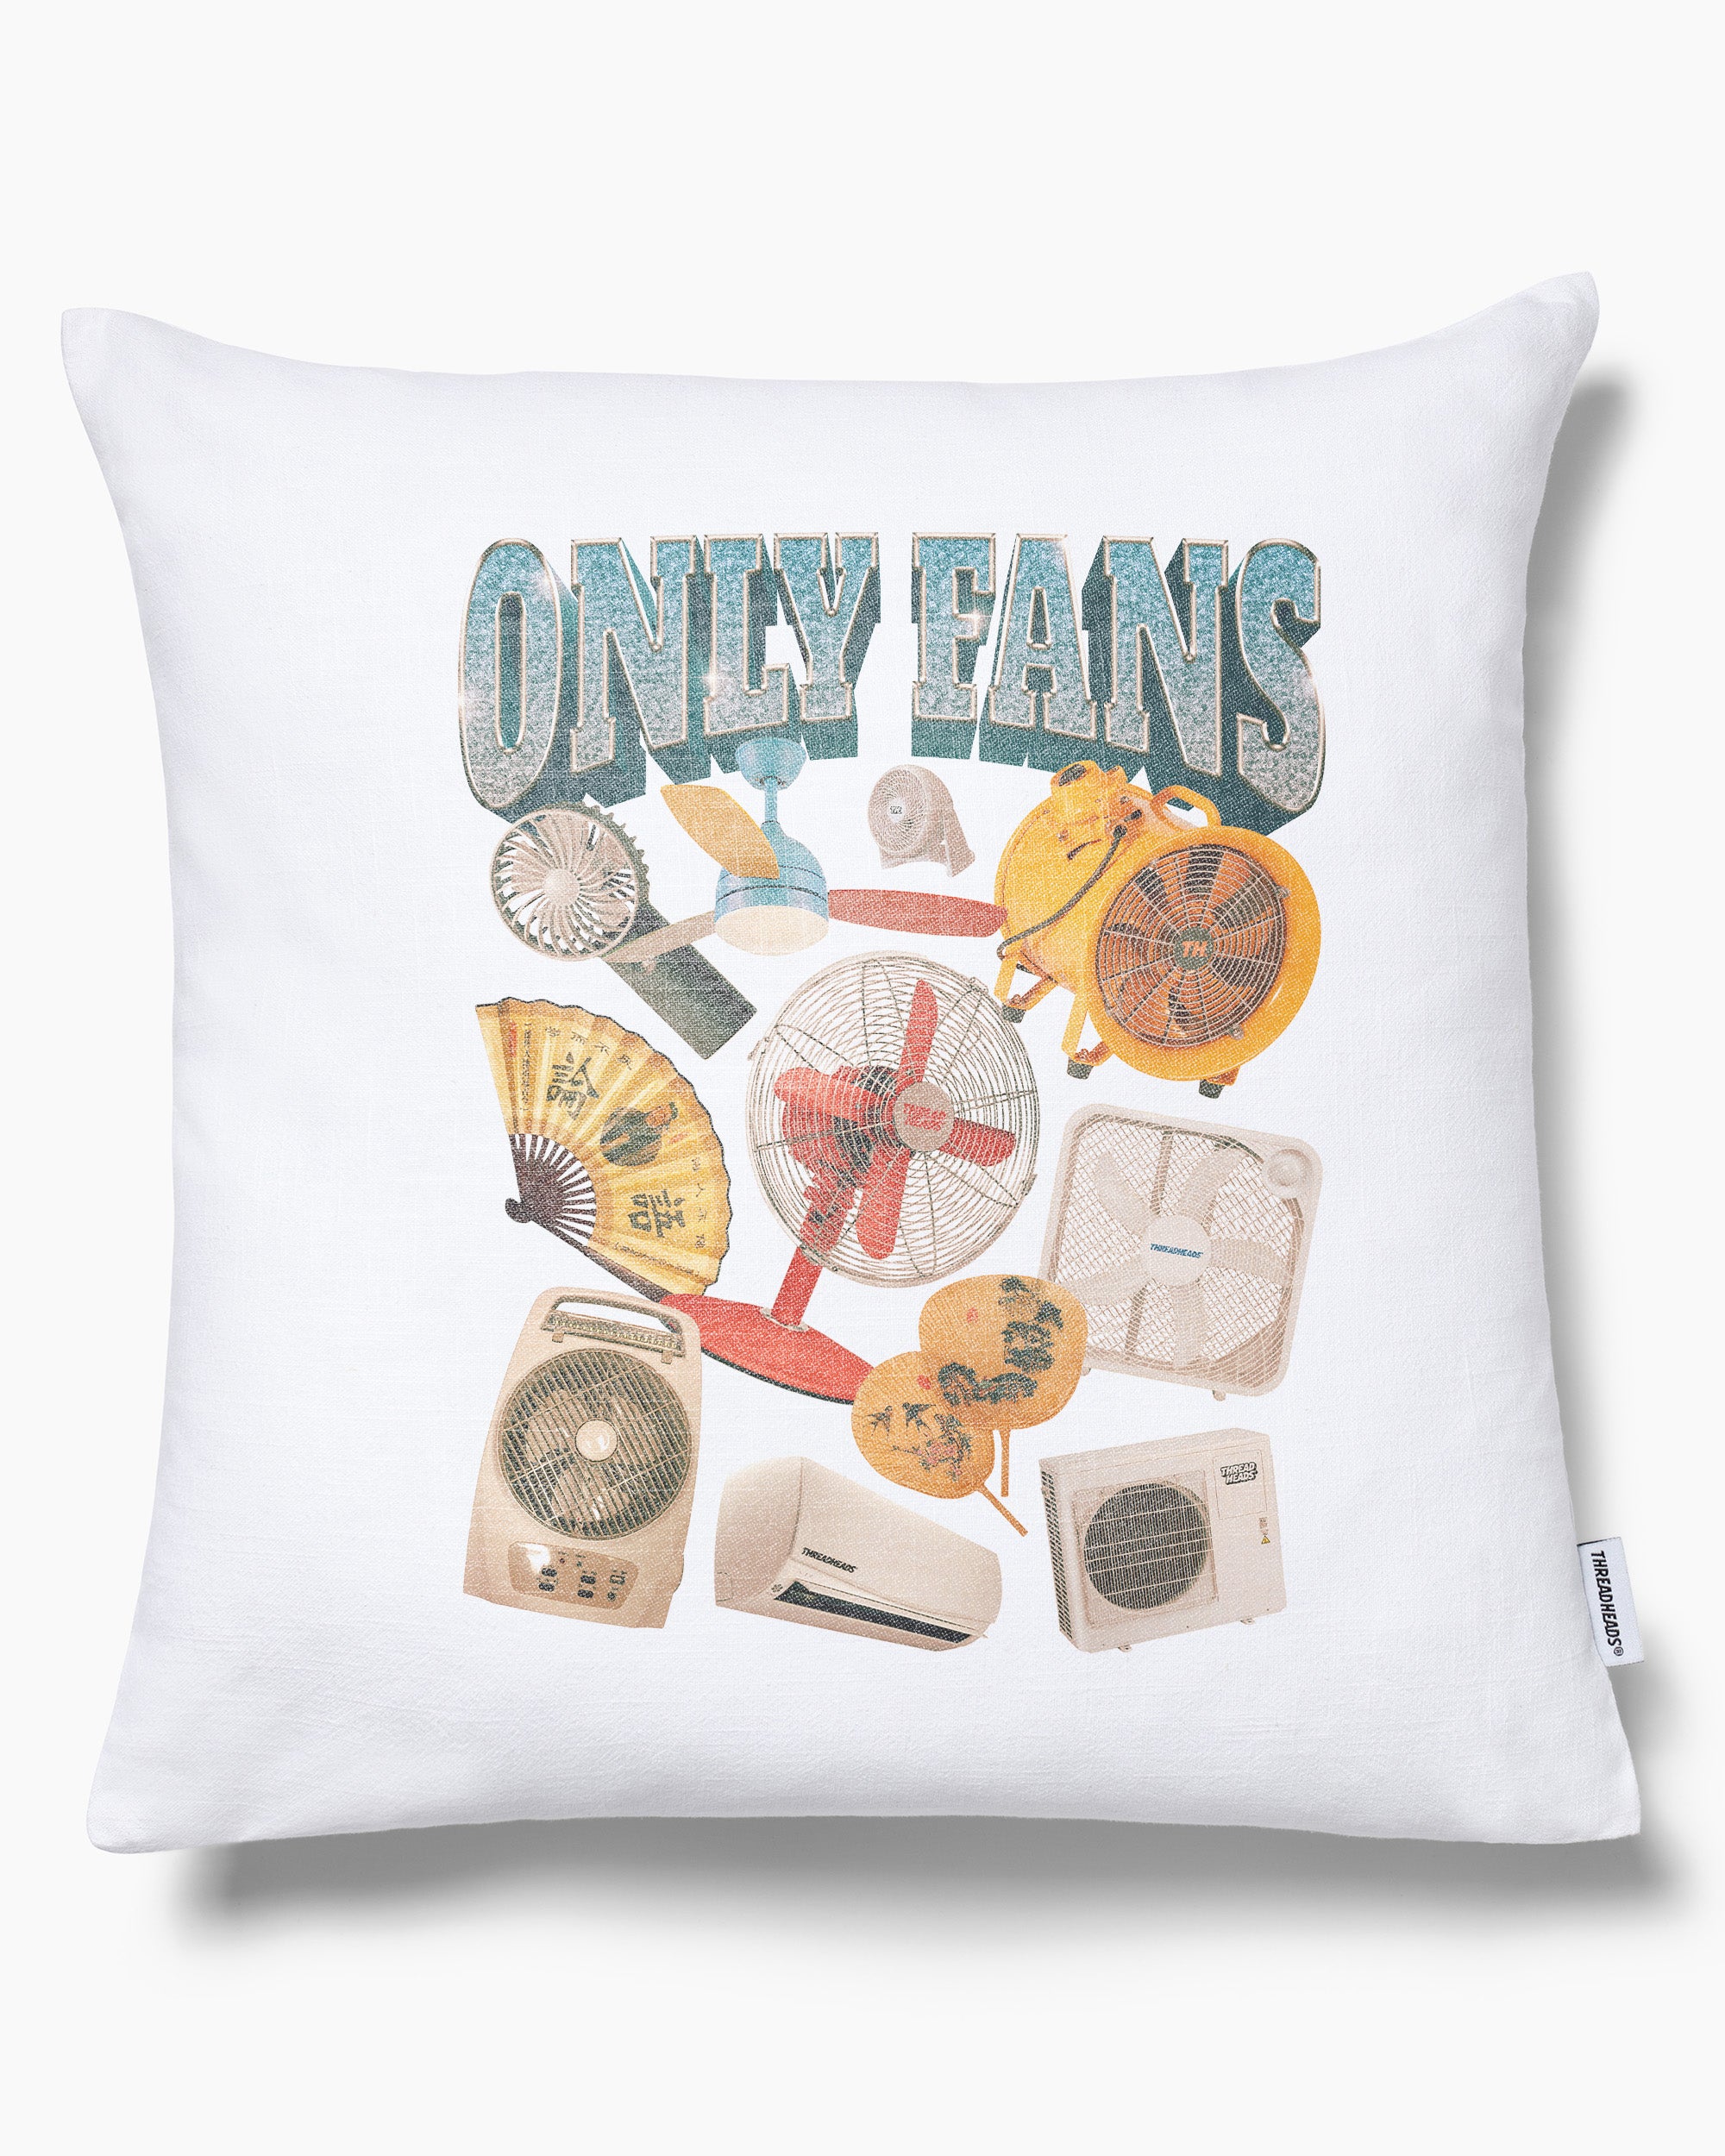 Only Fans Cushion